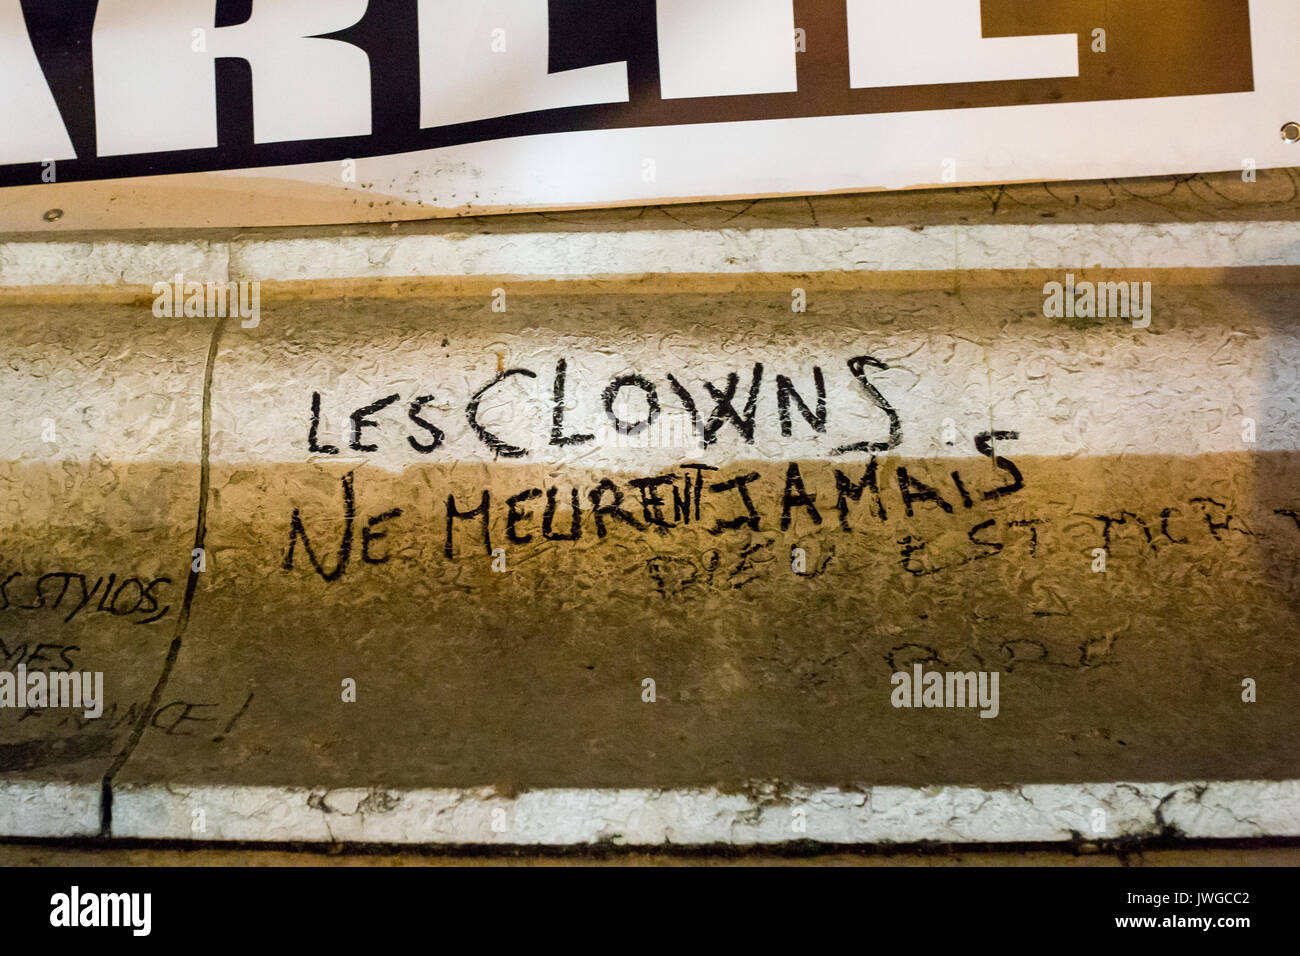 Clowns never die, les clowns ne meurent jamais. Homage at the victims of Charlie hebdo killing in Paris the 7th of january 2015. Stock Photo